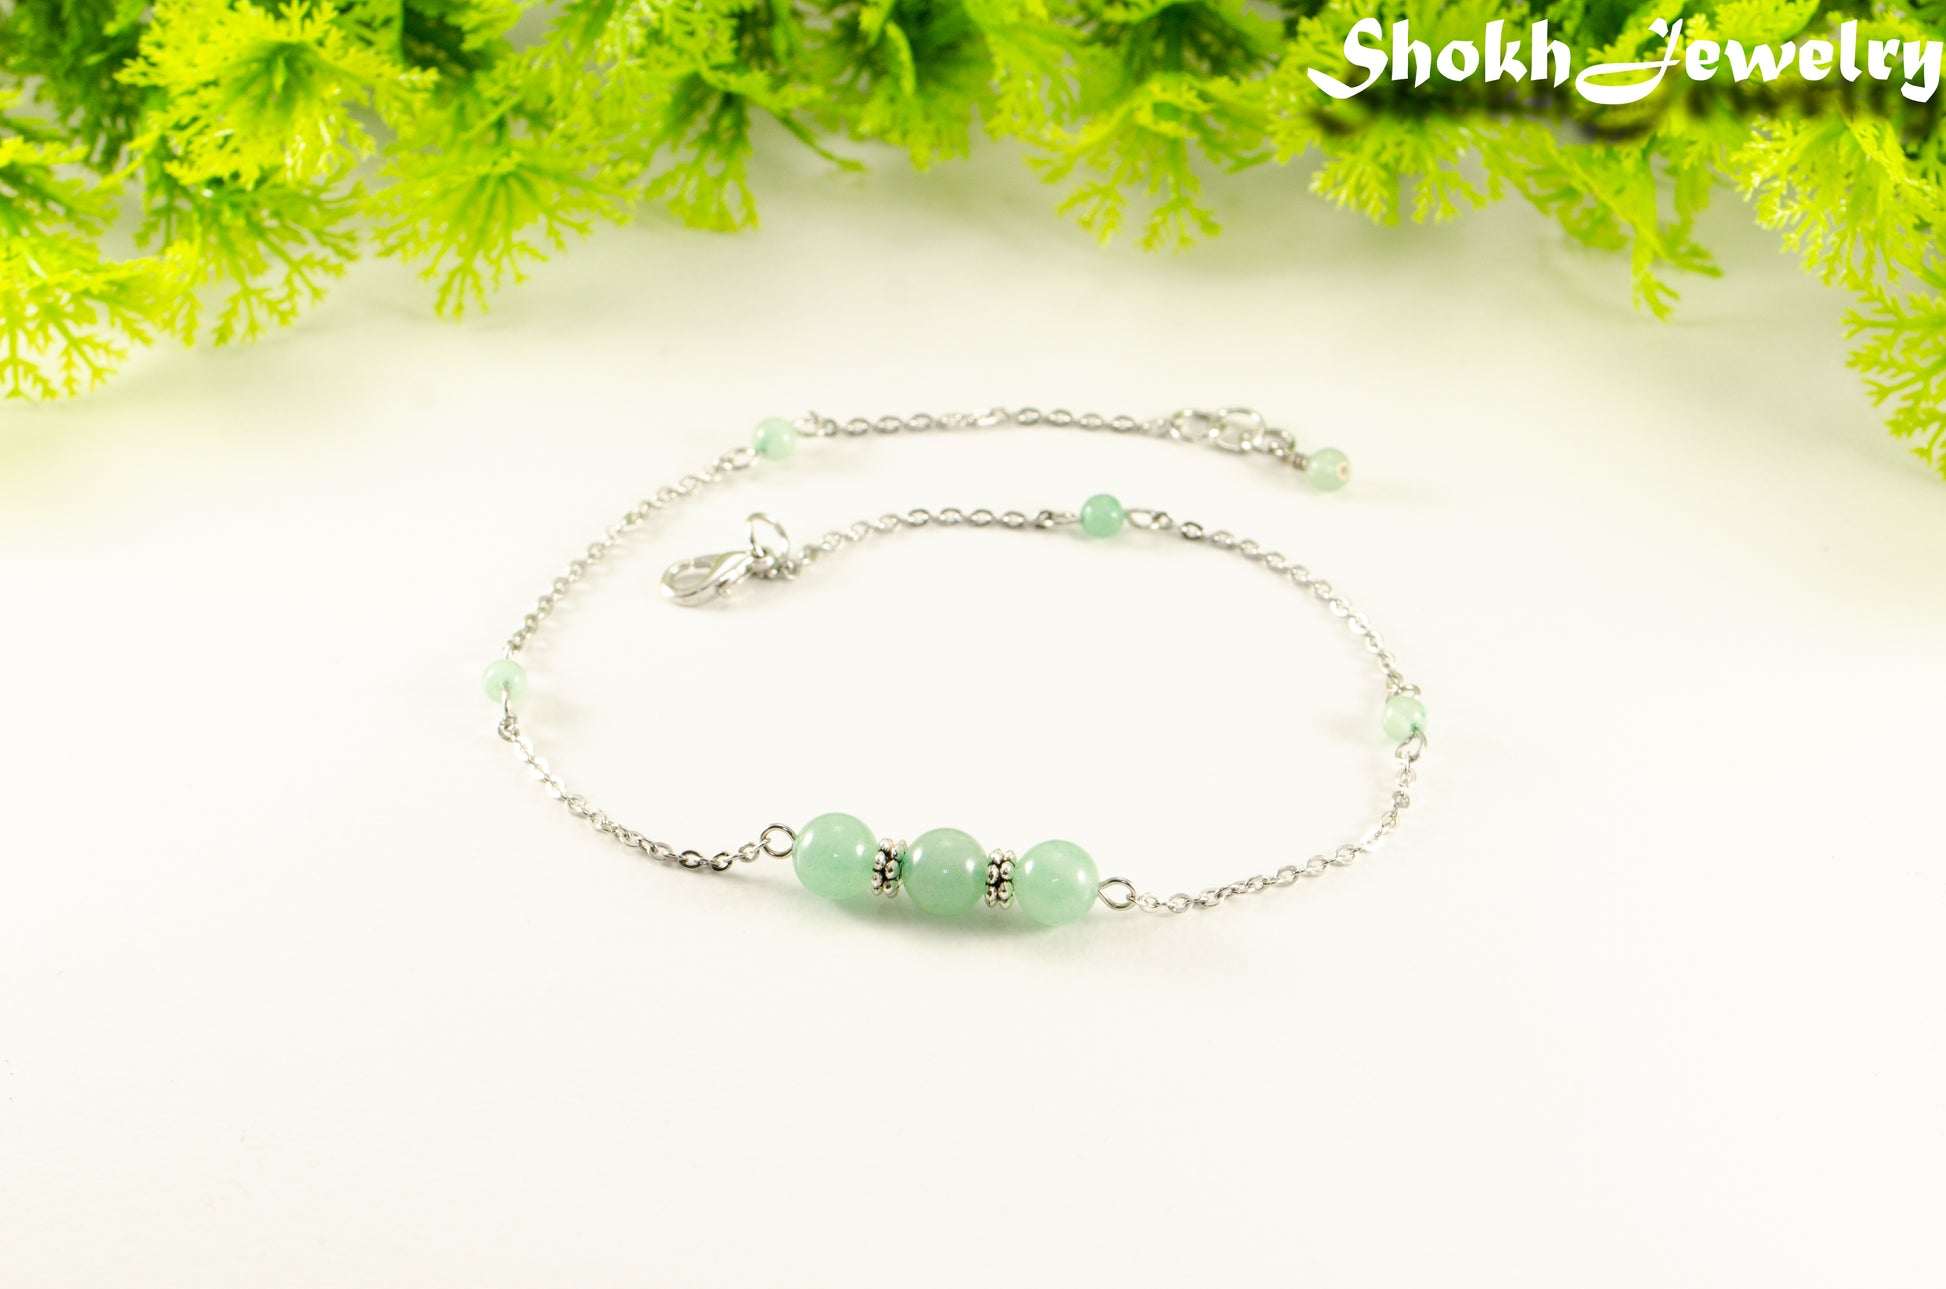 Natural Green Aventurine and Chain Choker Necklace for women.